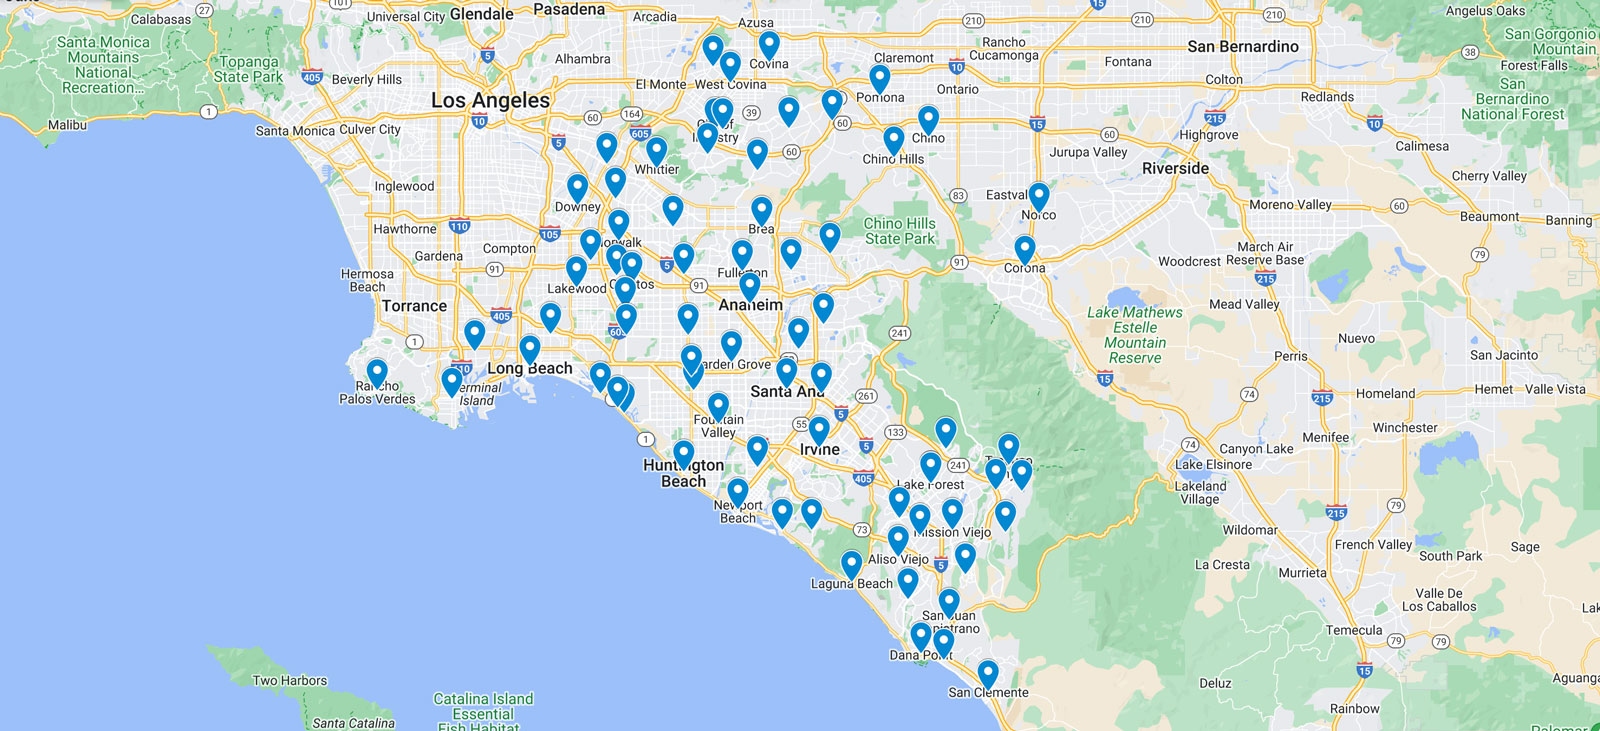 Southern California map pinned with areas serviced